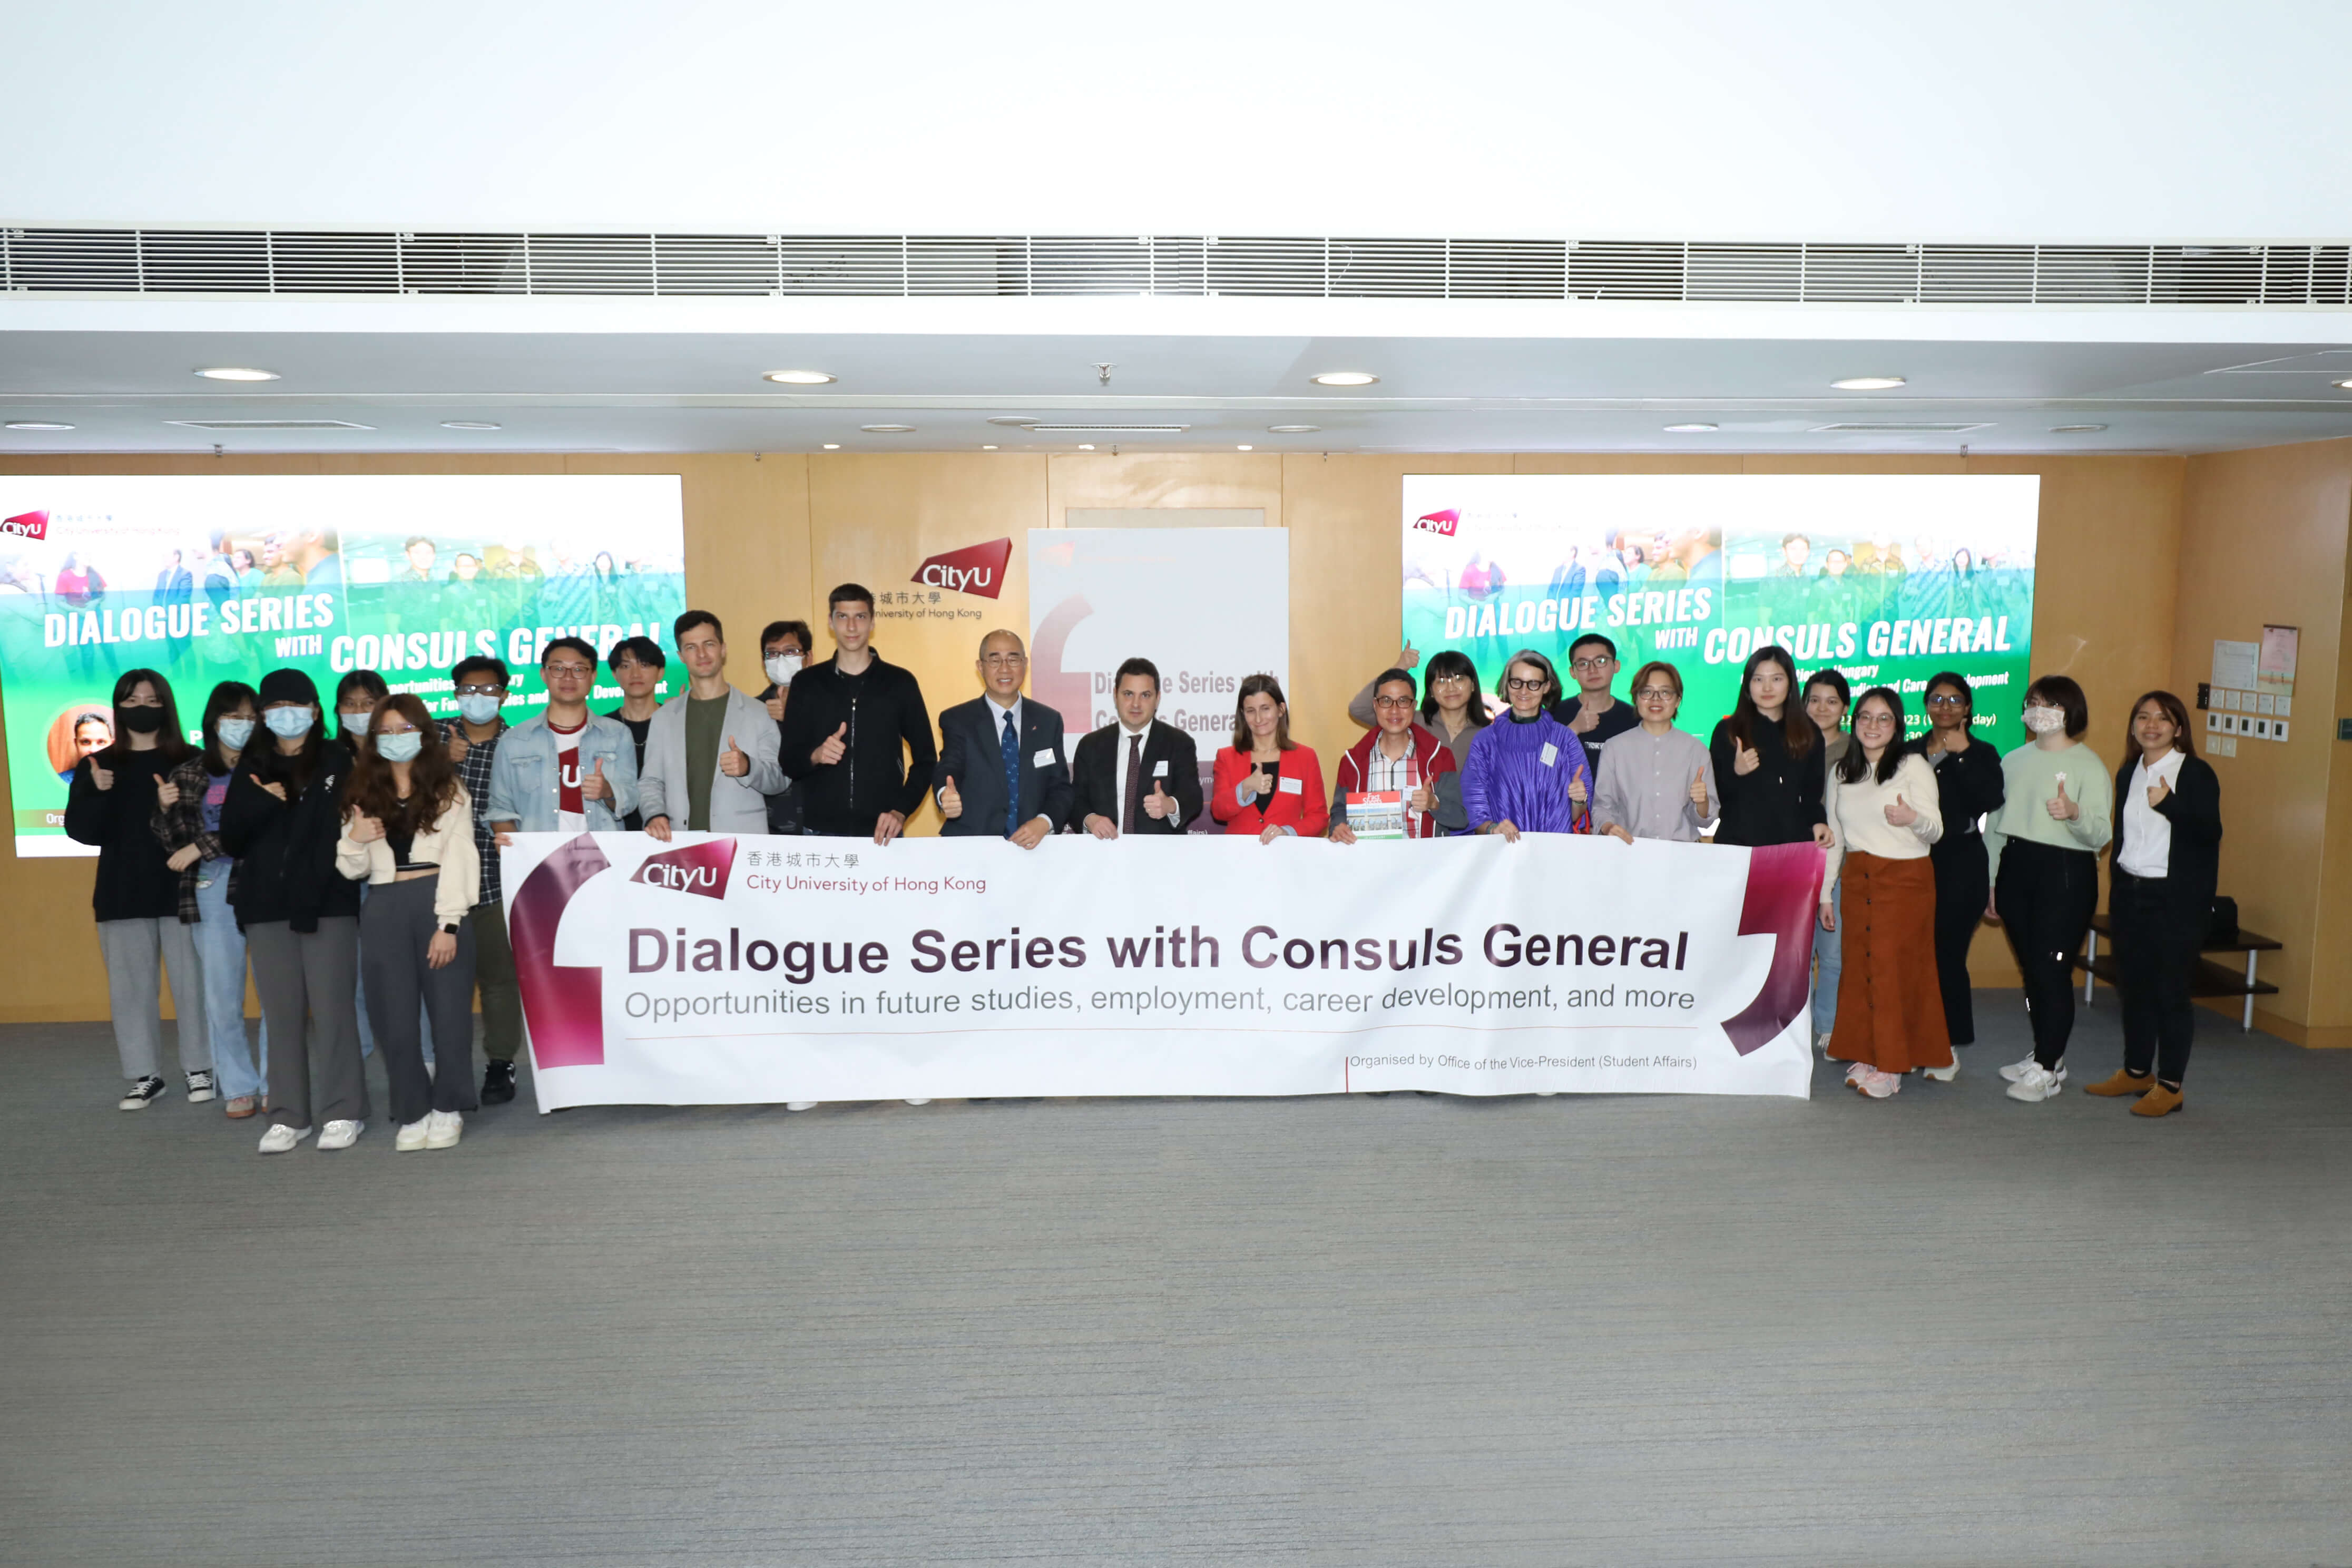 Dialogue Series with Consuls General